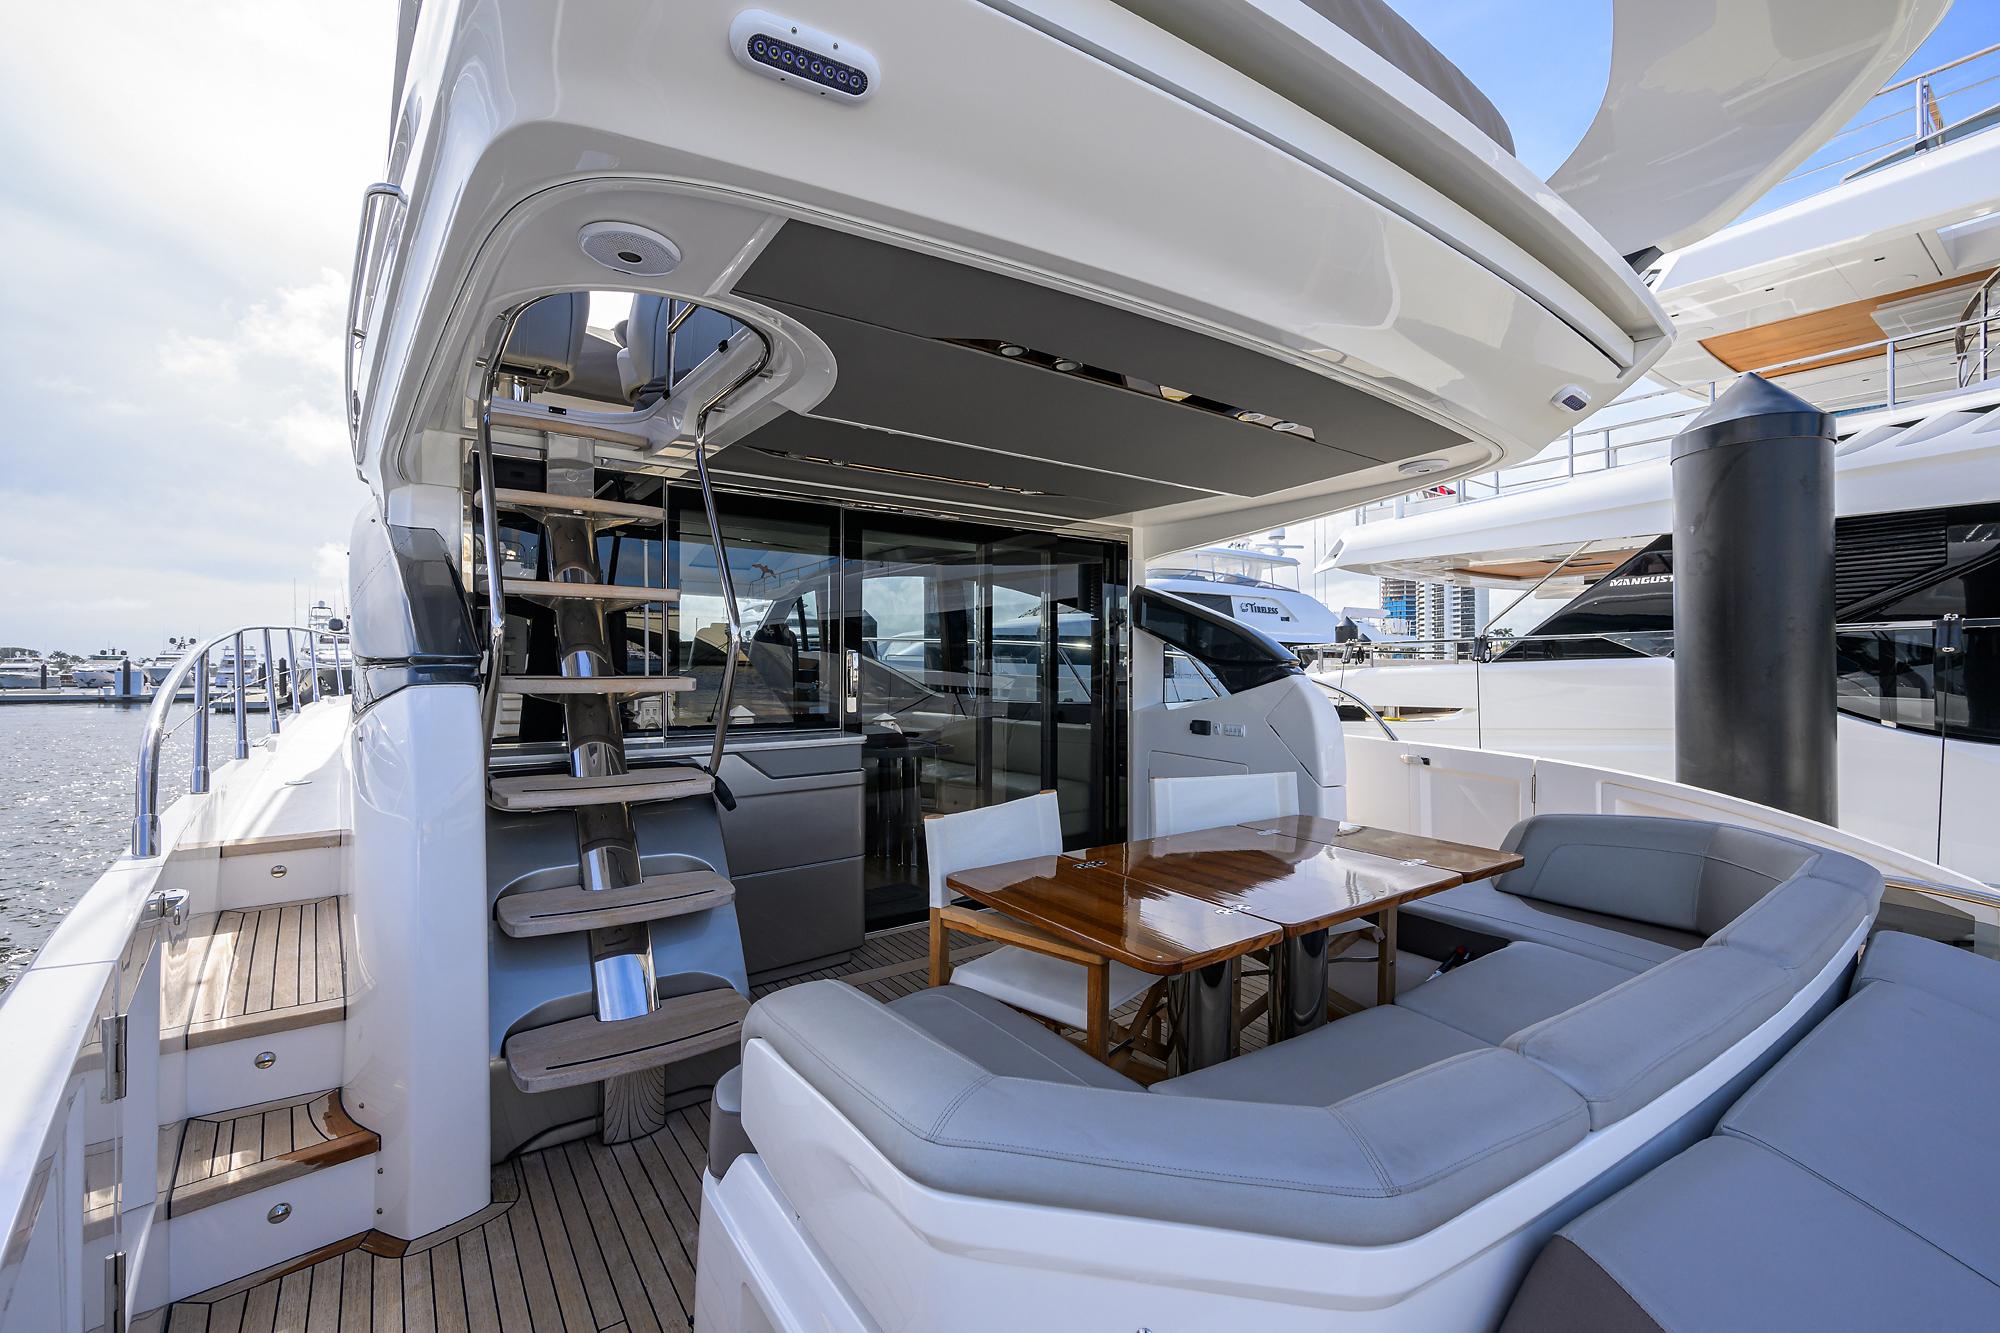 Princess S60 RockOn - Aft Deck, Stairs to Bridge, Seating and Table